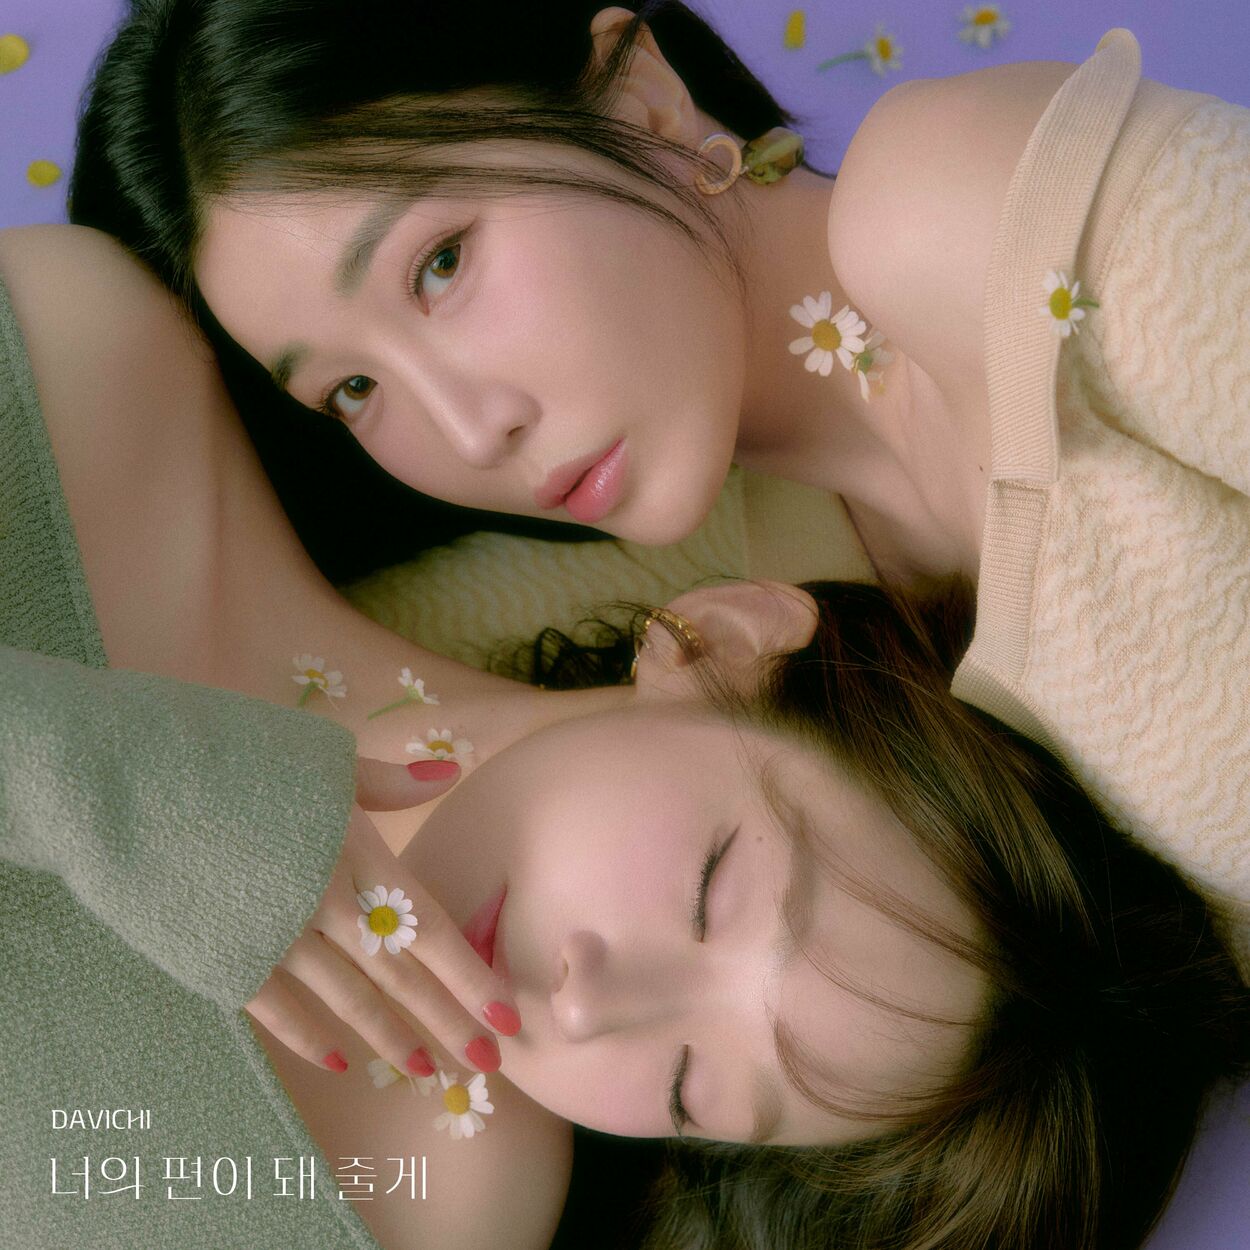 Davichi – I’ll be by your side – Single